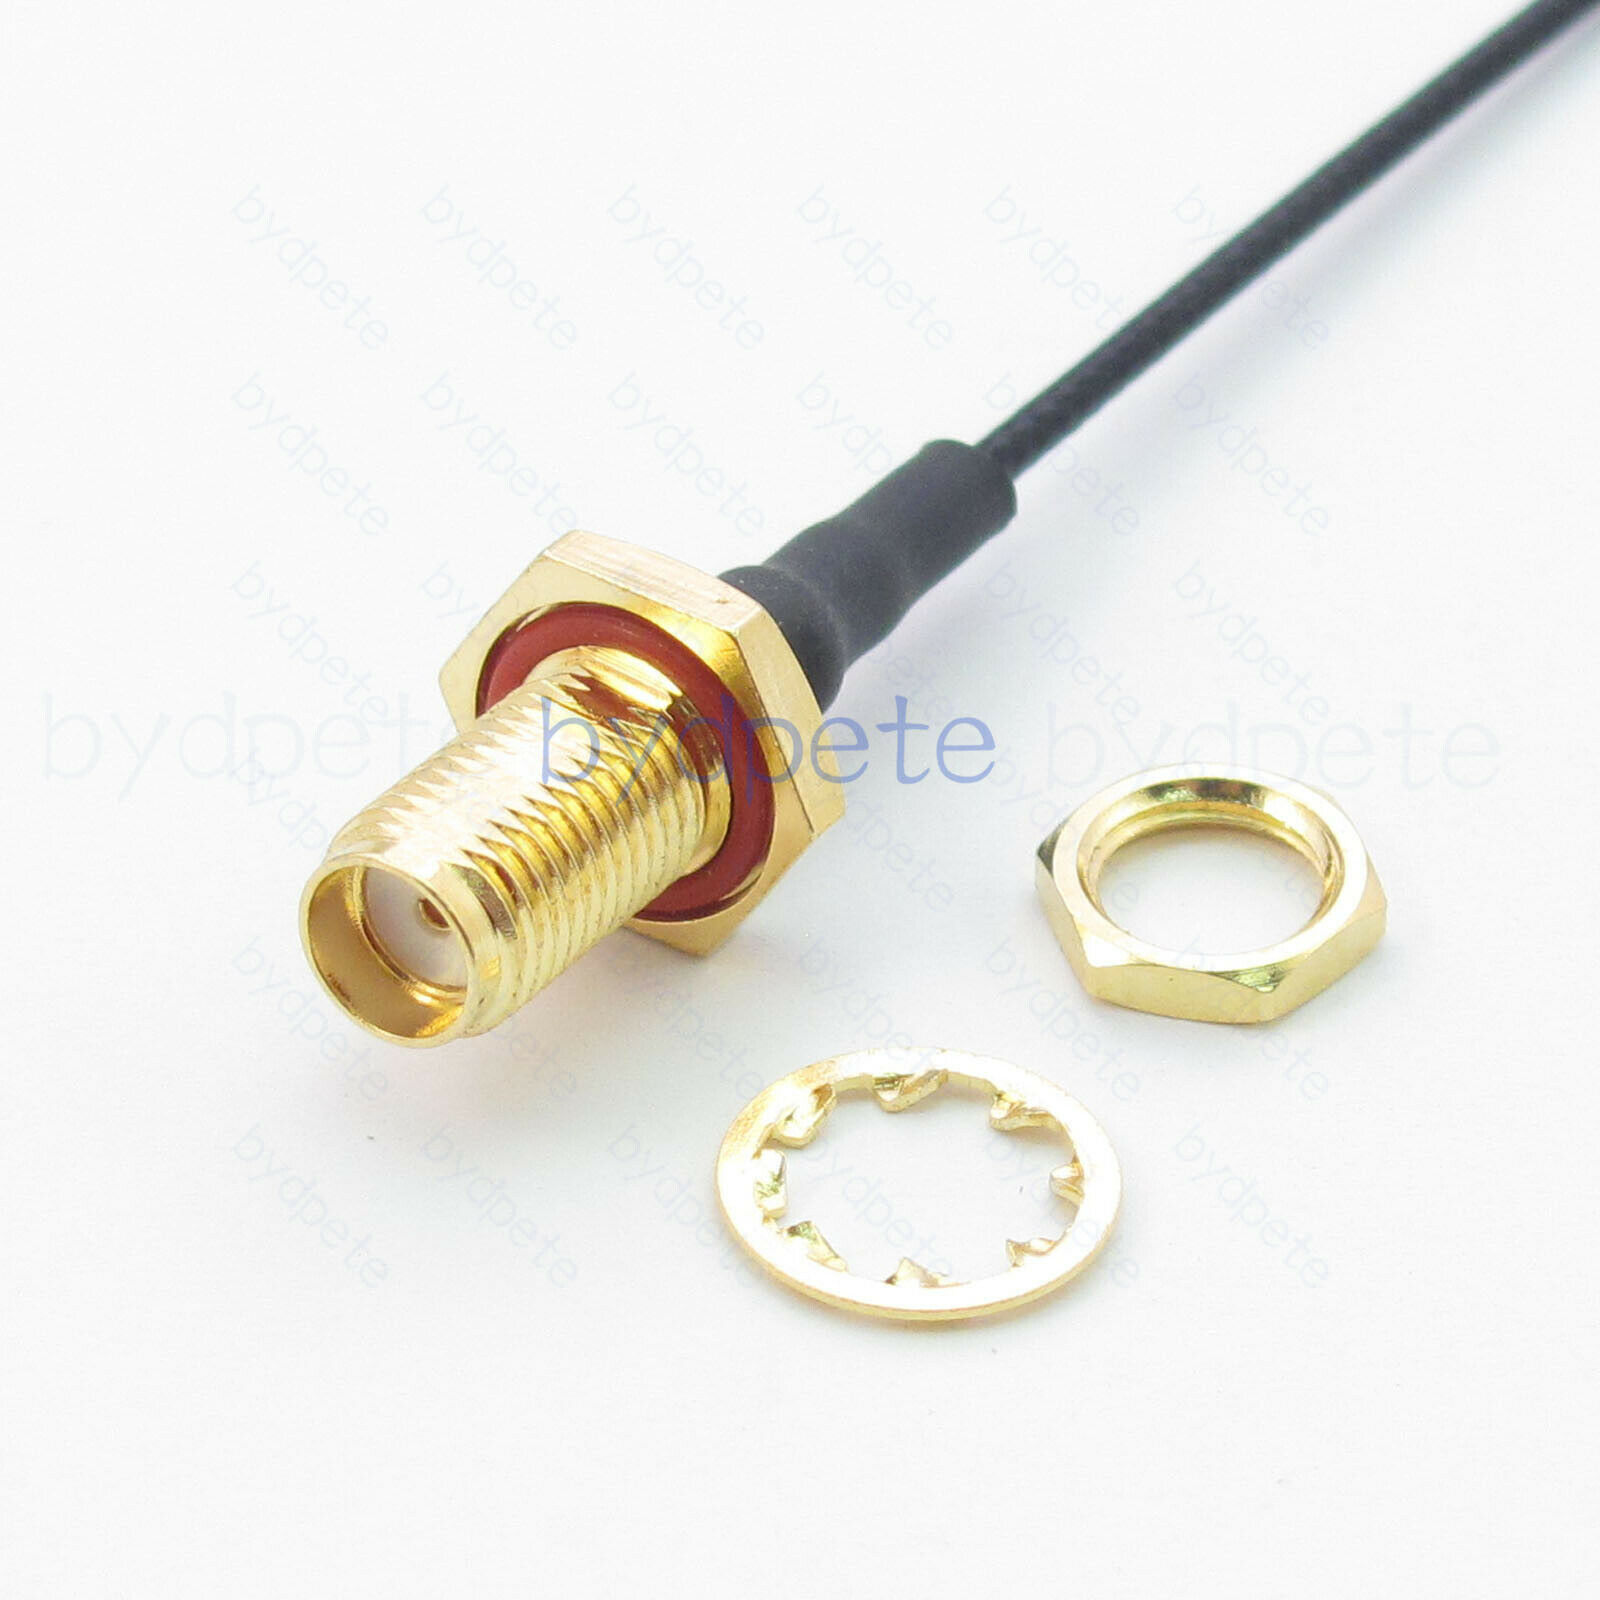 MHF4 IPX4 IPEX4 WFL W.FL Plug to SMA female bulkhead Waterproof D-cut 1.13mm Pigtail cable Coaxial Koaxial Kable RF 50ohms bydpete